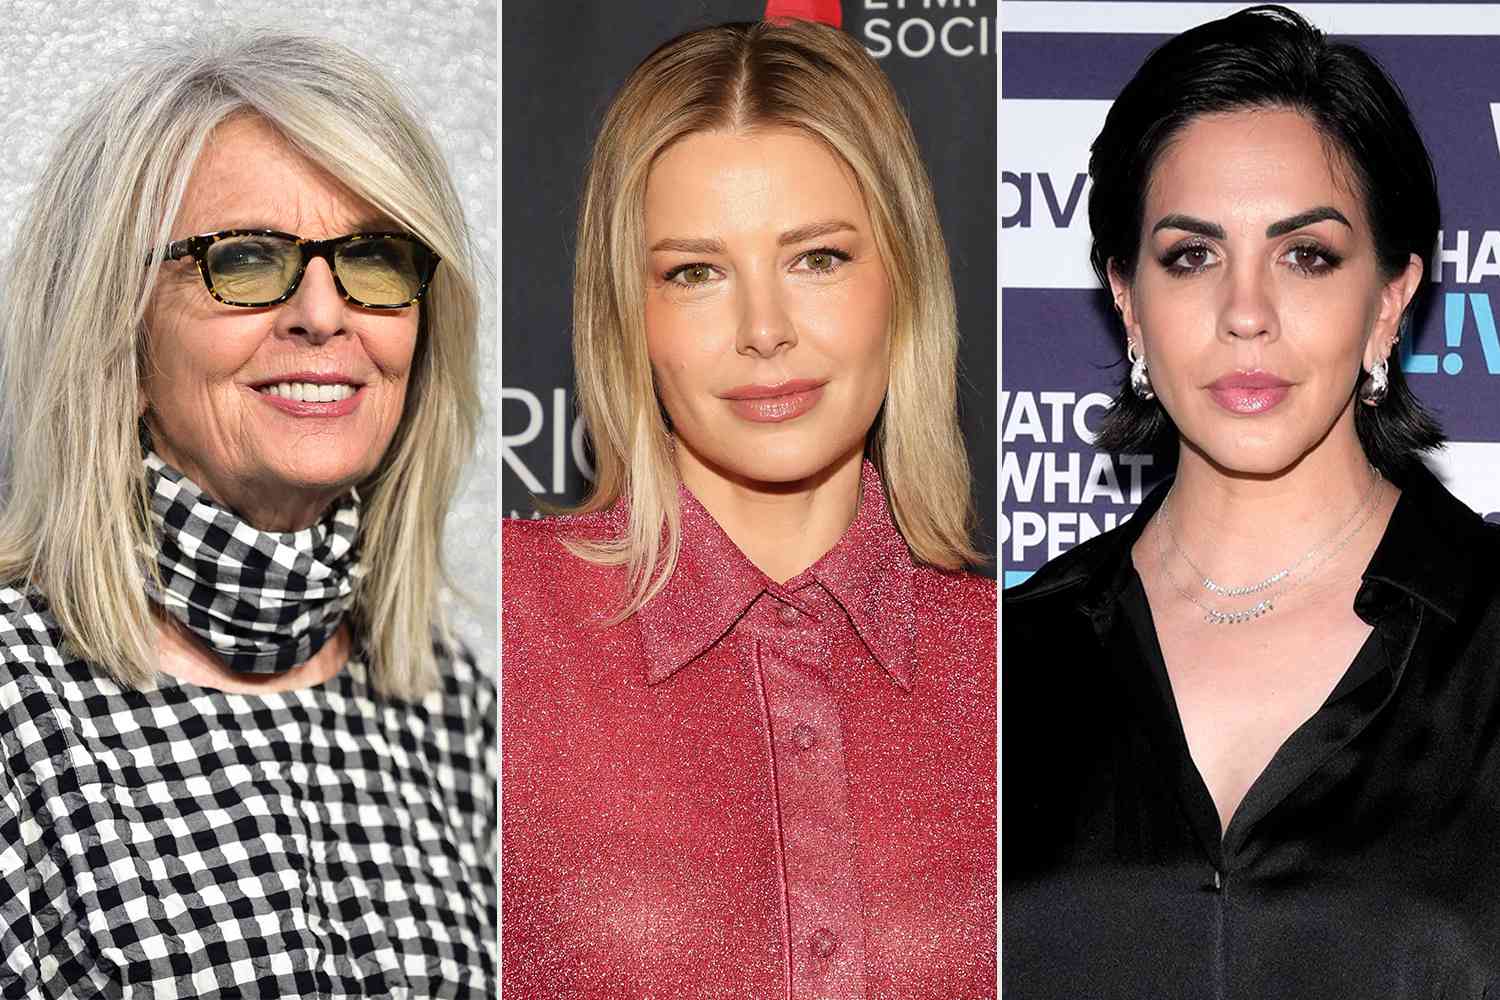 Diane Keaton Visits Ariana Madix and Katie Maloney's Something About Her — Where She Has a Sandwich Named After Her!